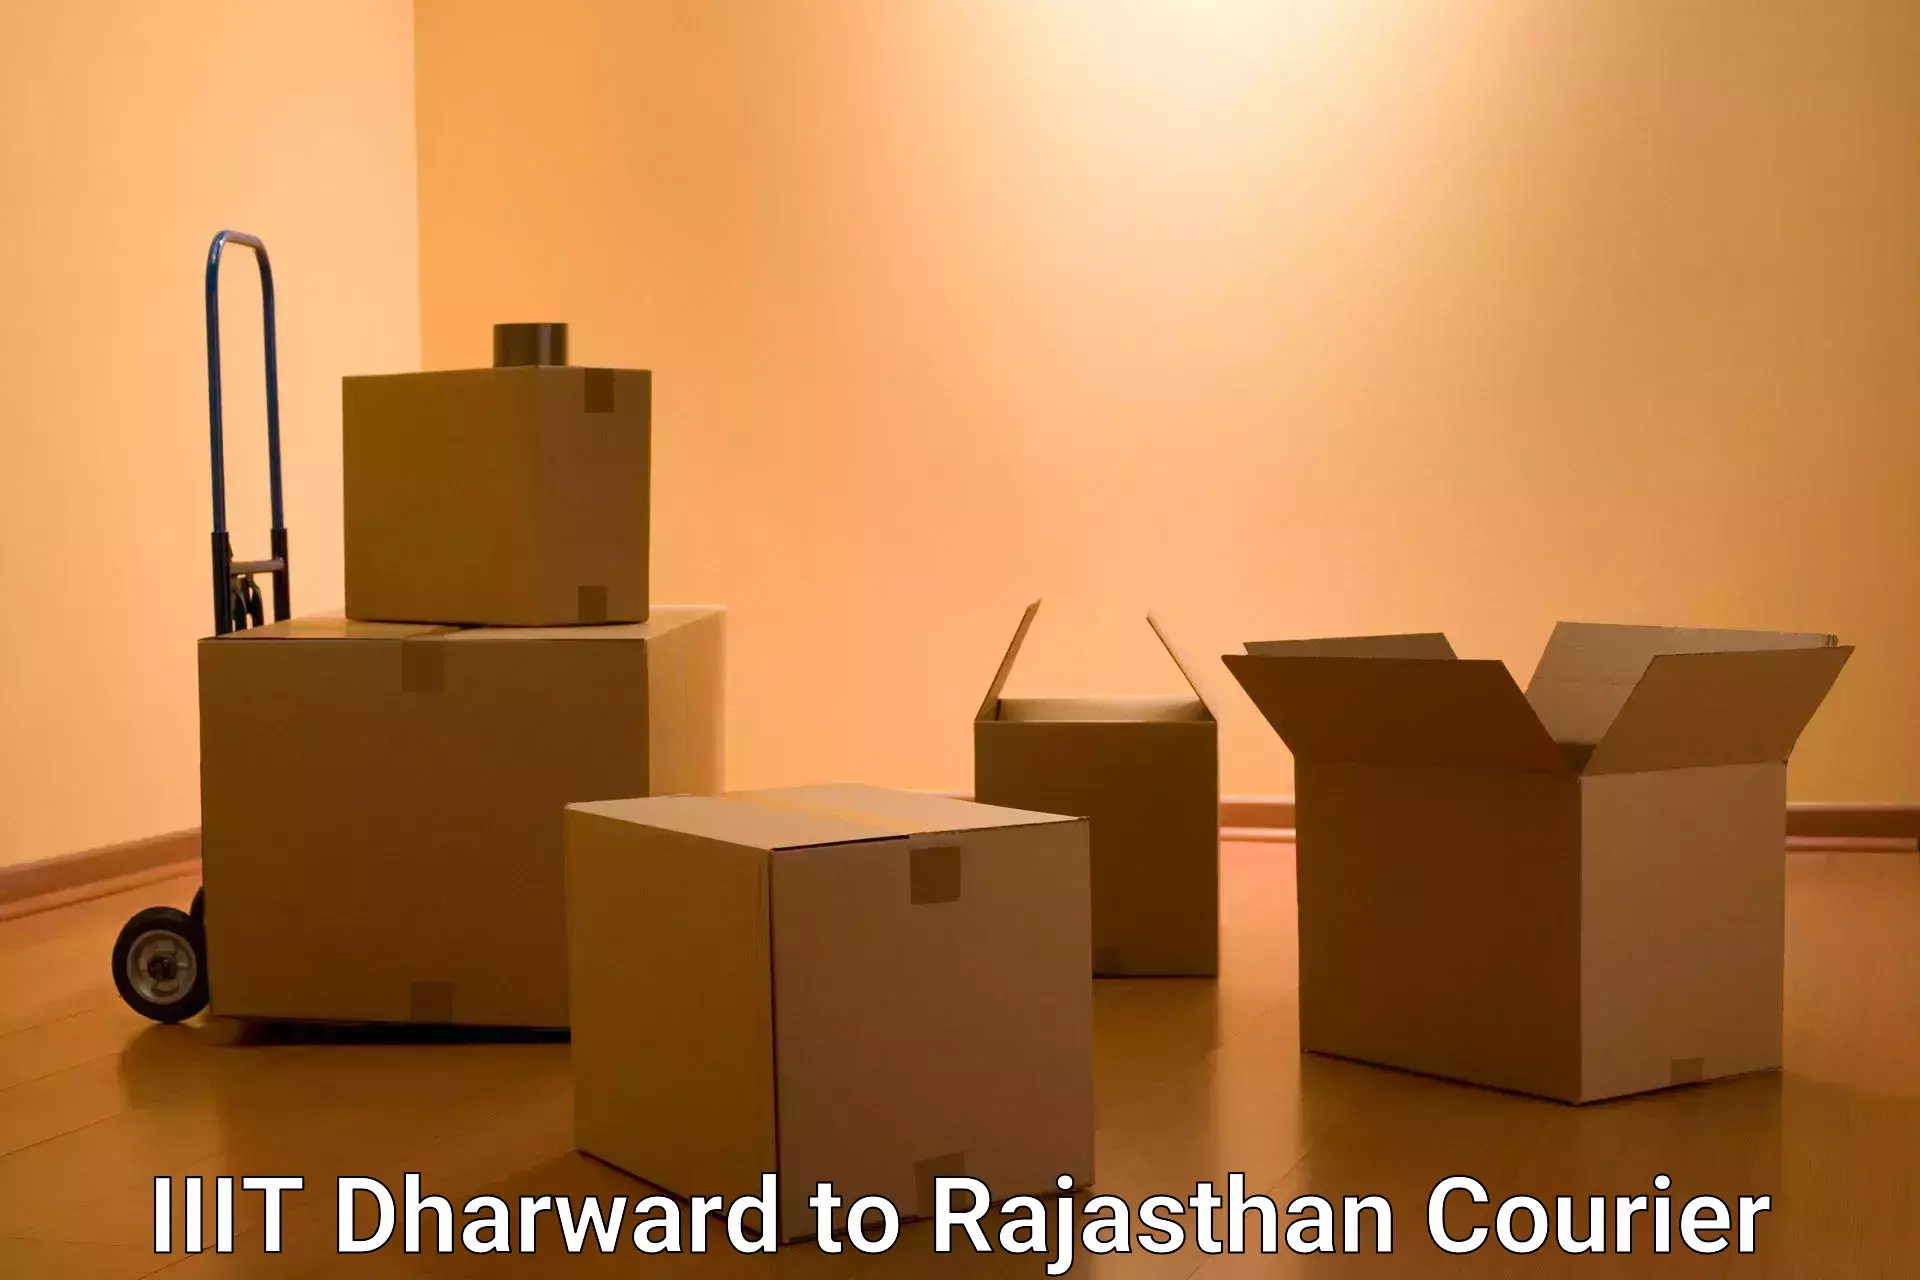 Courier dispatch services IIIT Dharward to Rajasthan